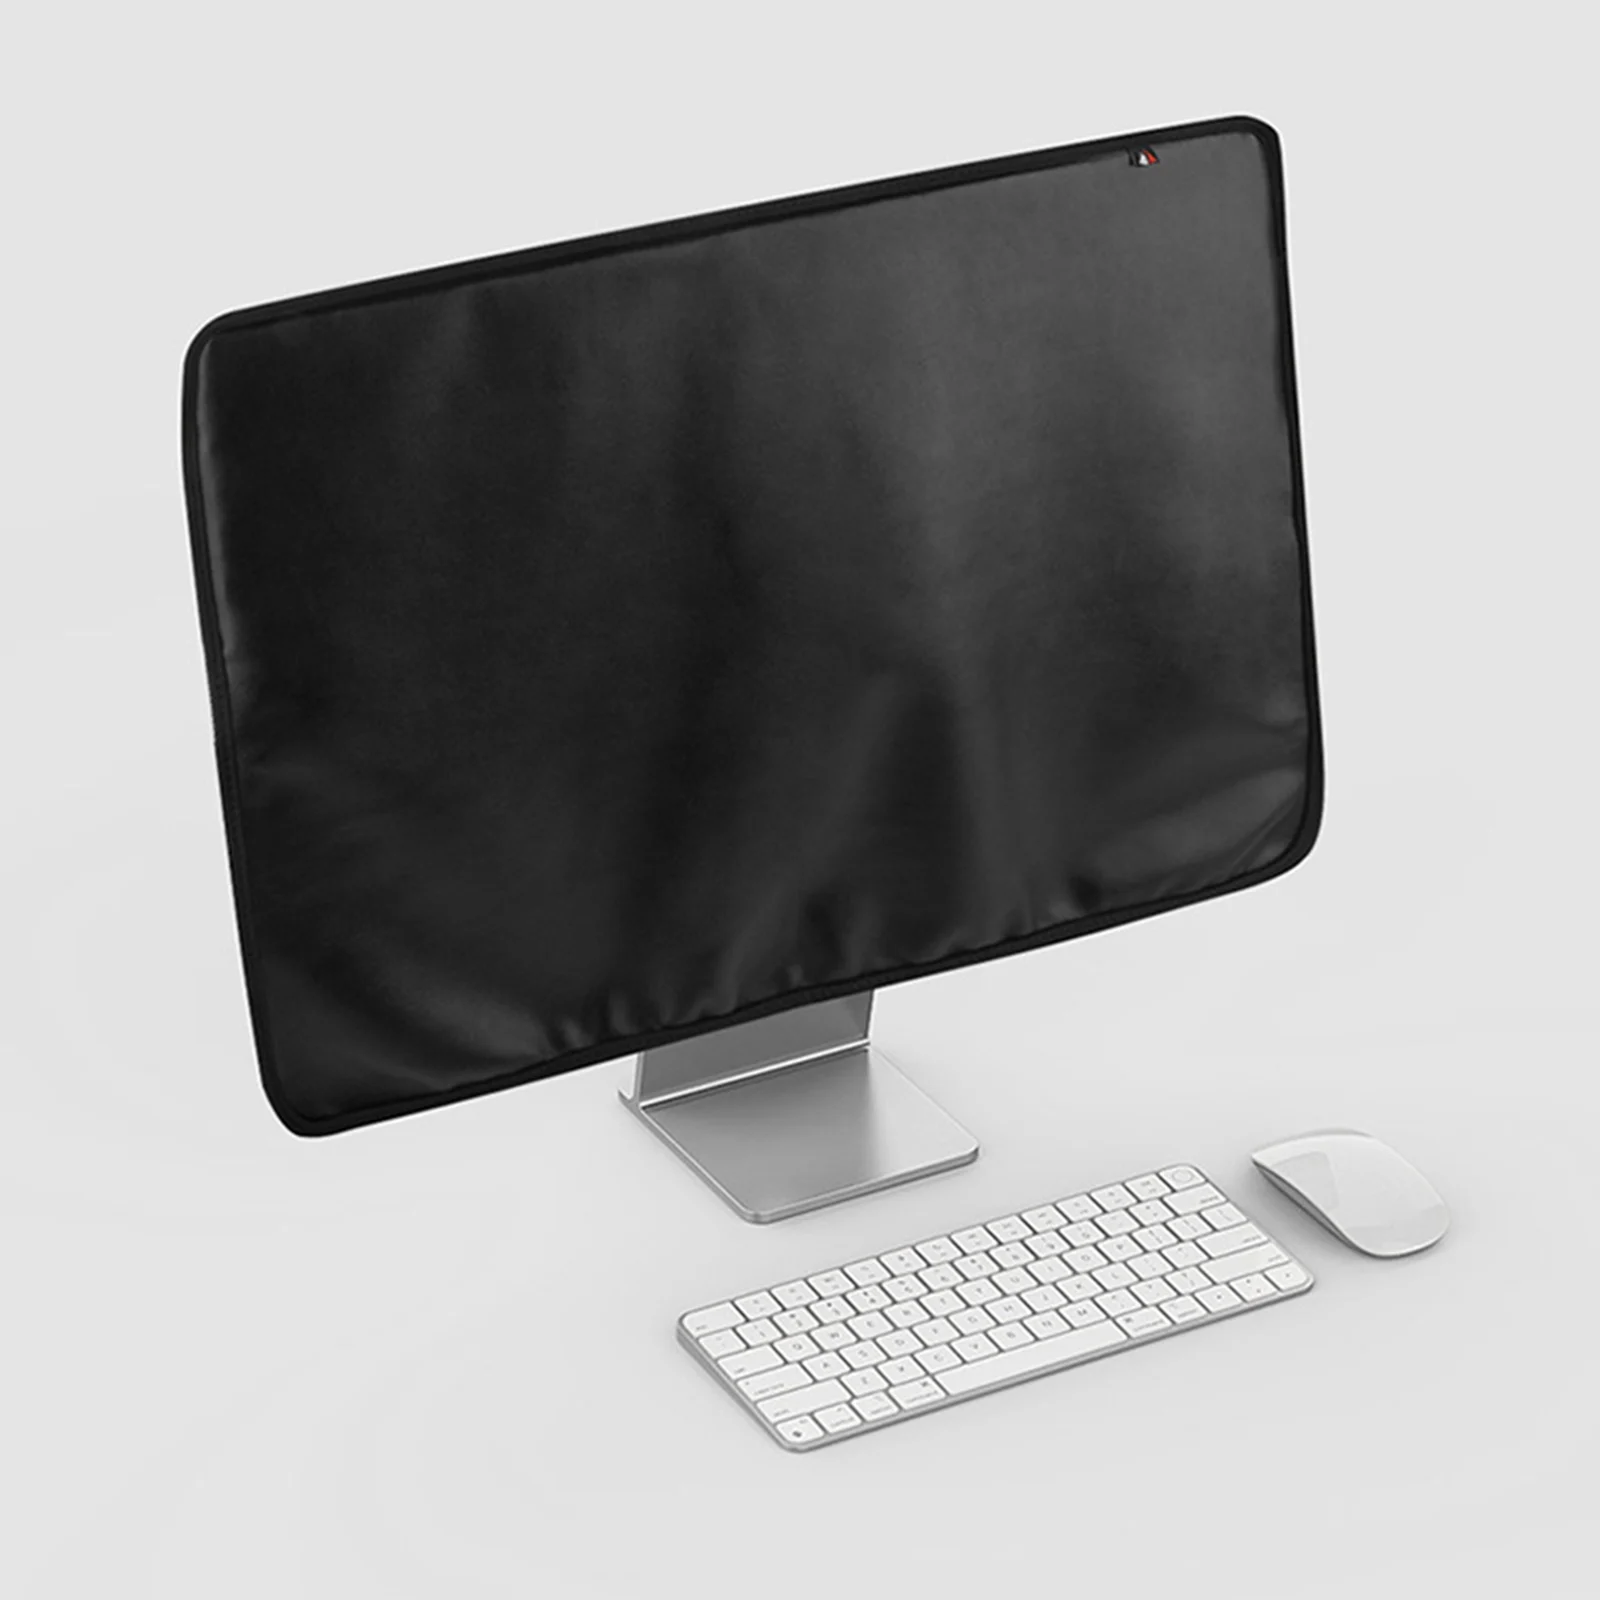 Monitor Dust Cover PU Leather Antistatic Display HD Sleeve Protective Compatible Fit for iMac 24`` Computer PC